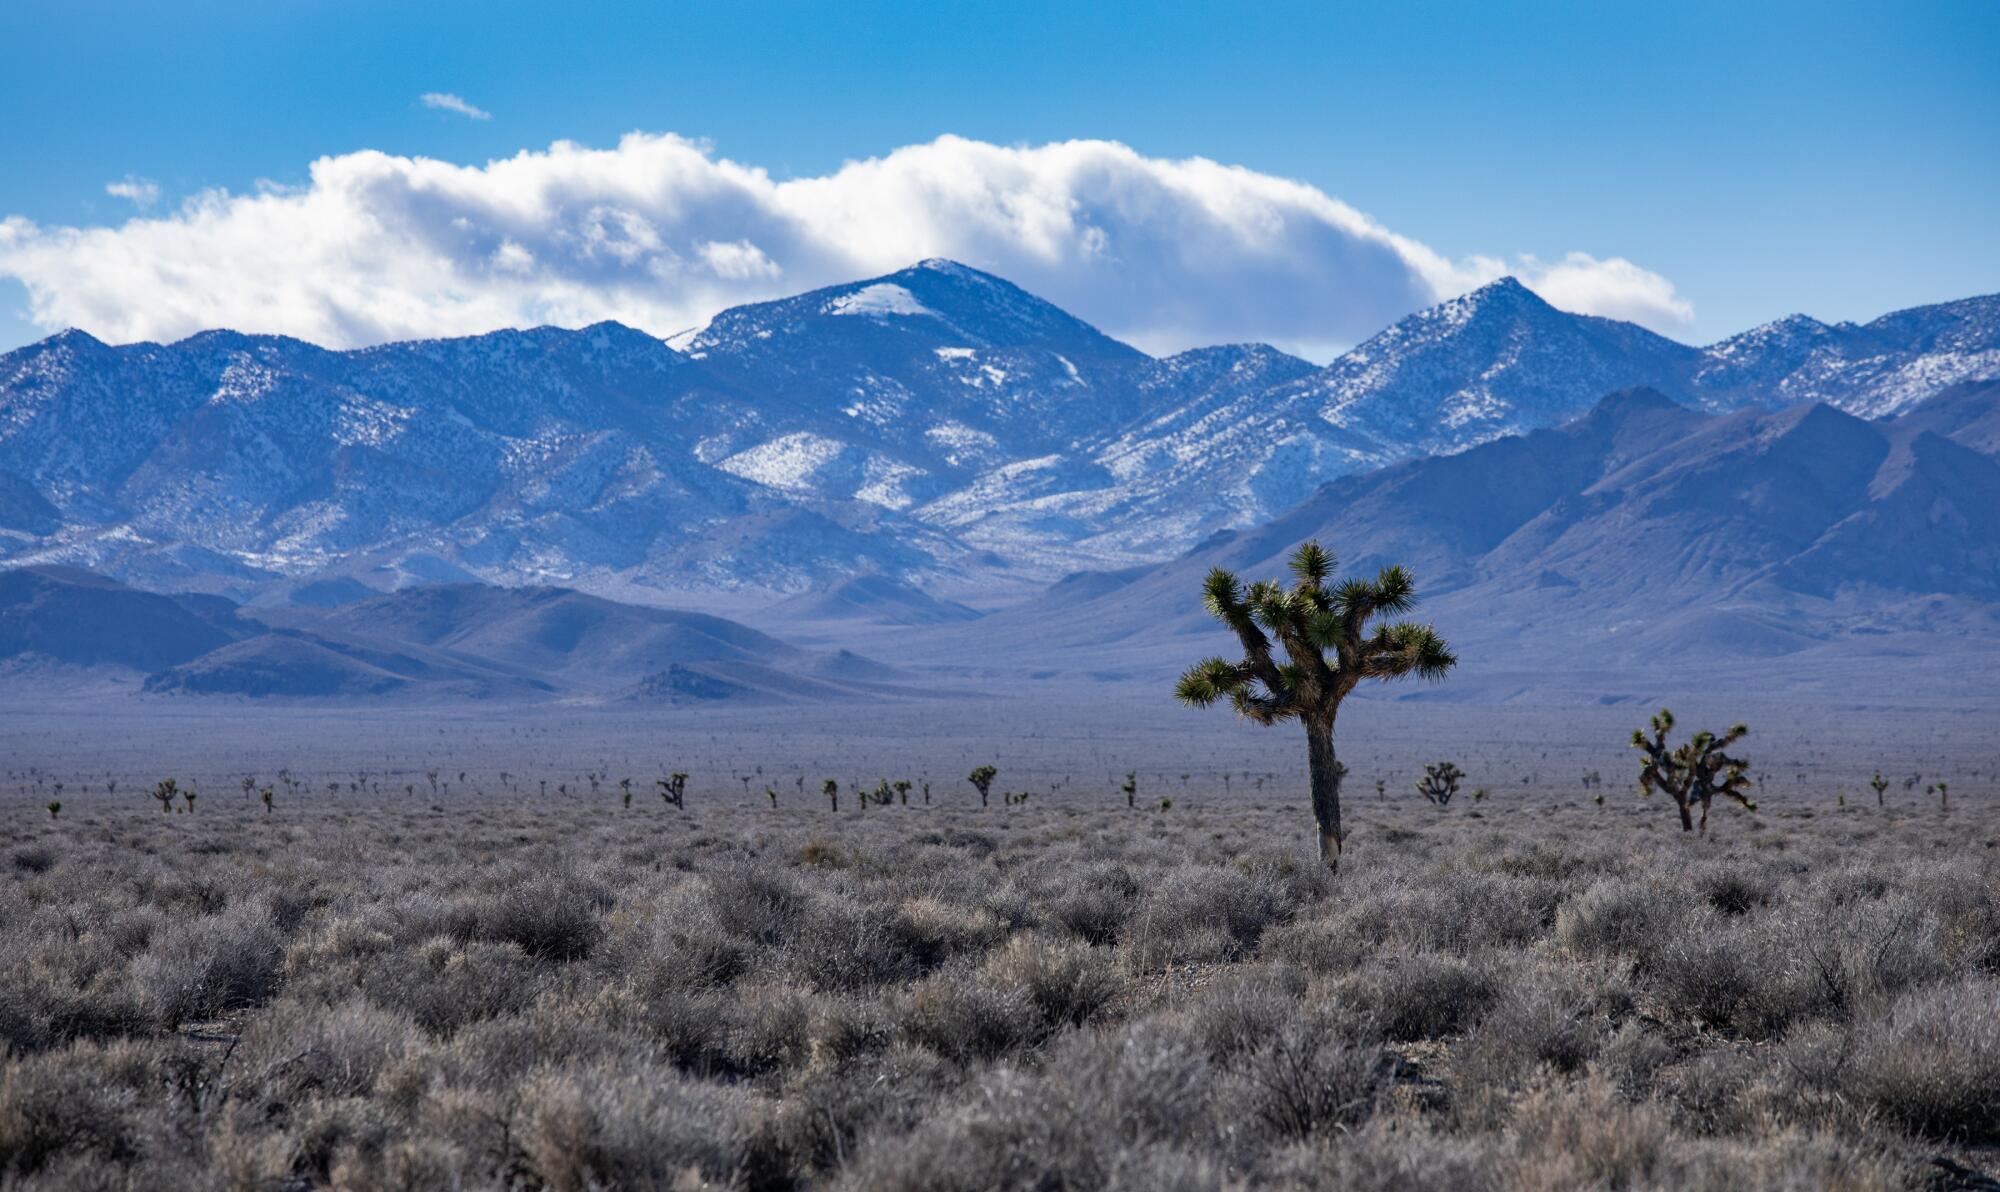 Snowy mountains in Death Valley National Park tower over the Joshua trees of Sarcobatus Flat.